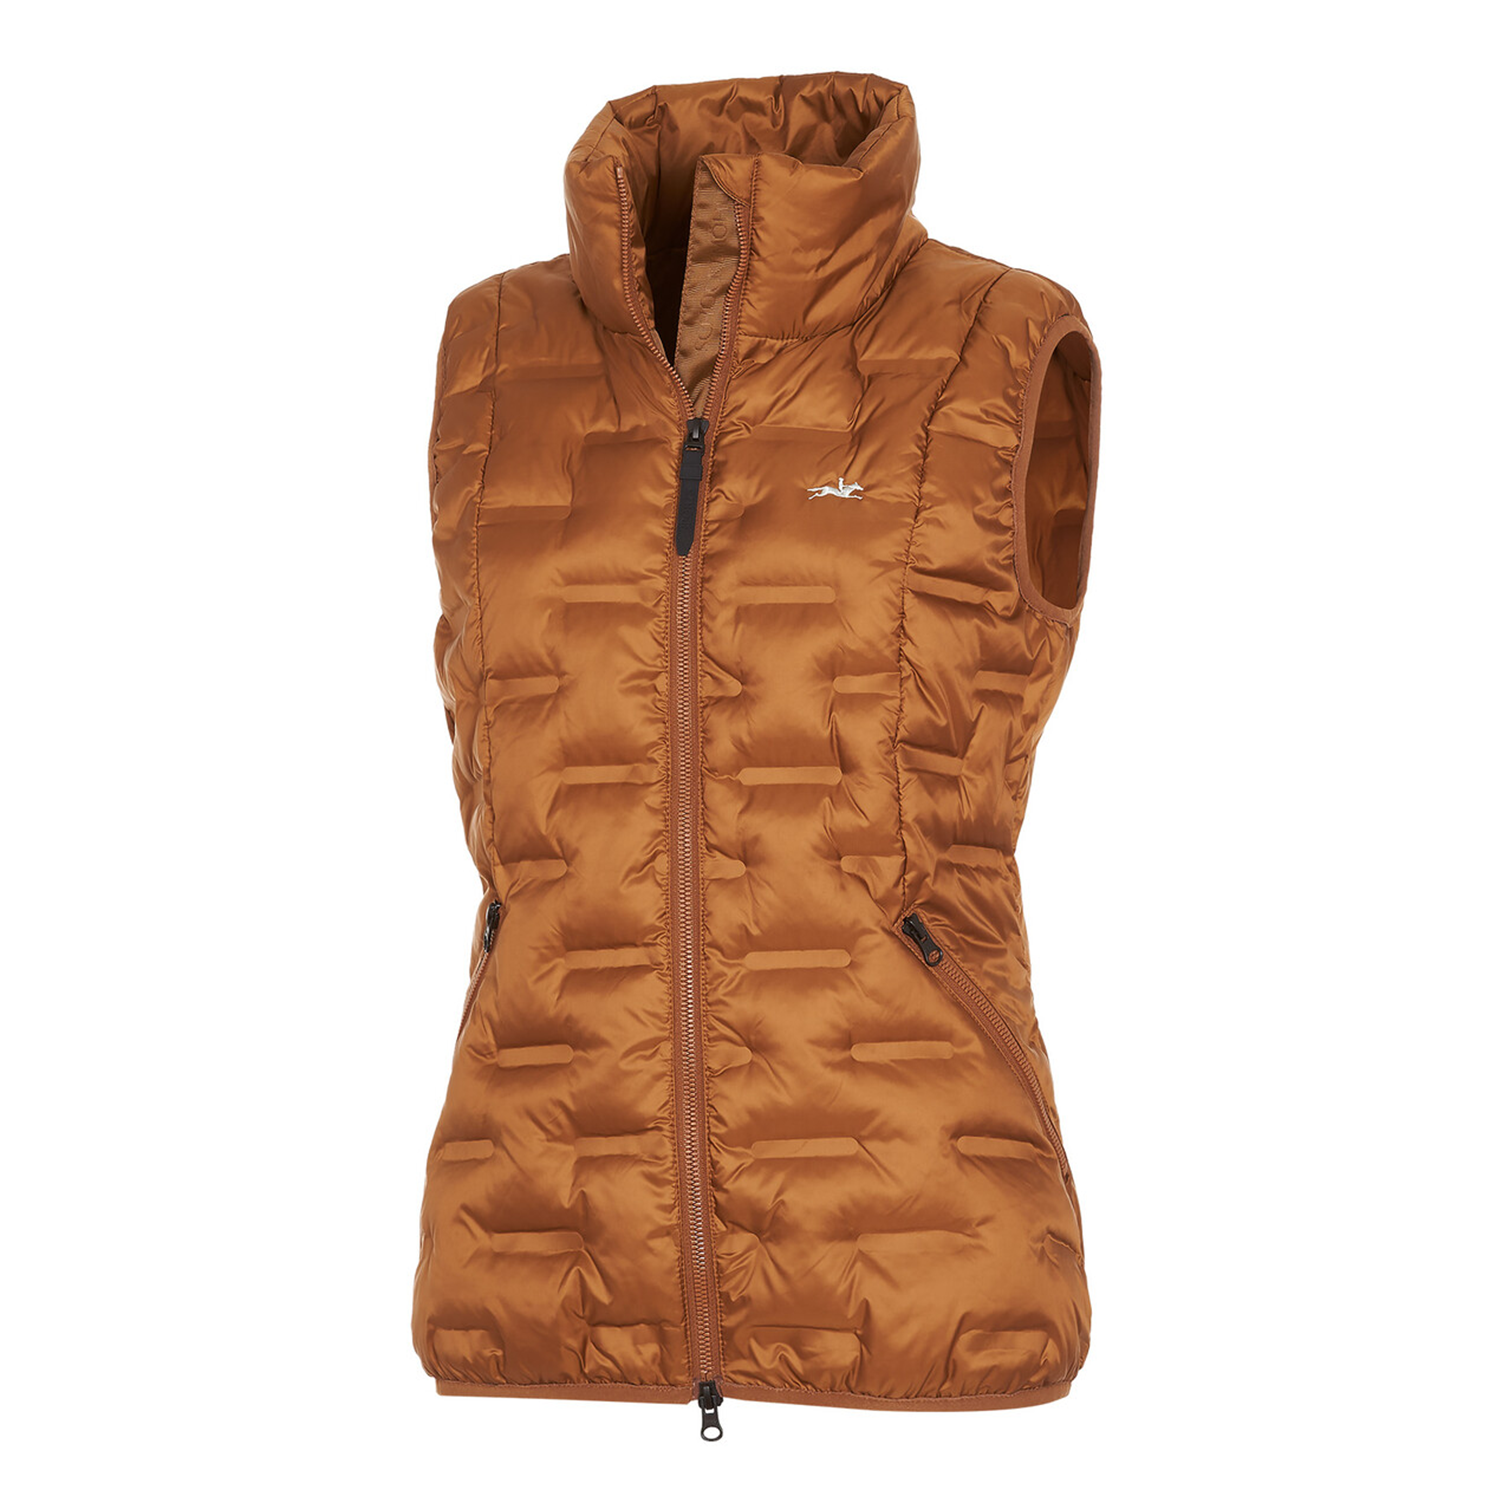 Quilted Favorite Cognac Get Style Waistcoat, Rose Hot Ladies Sale Online Your Schockemohle